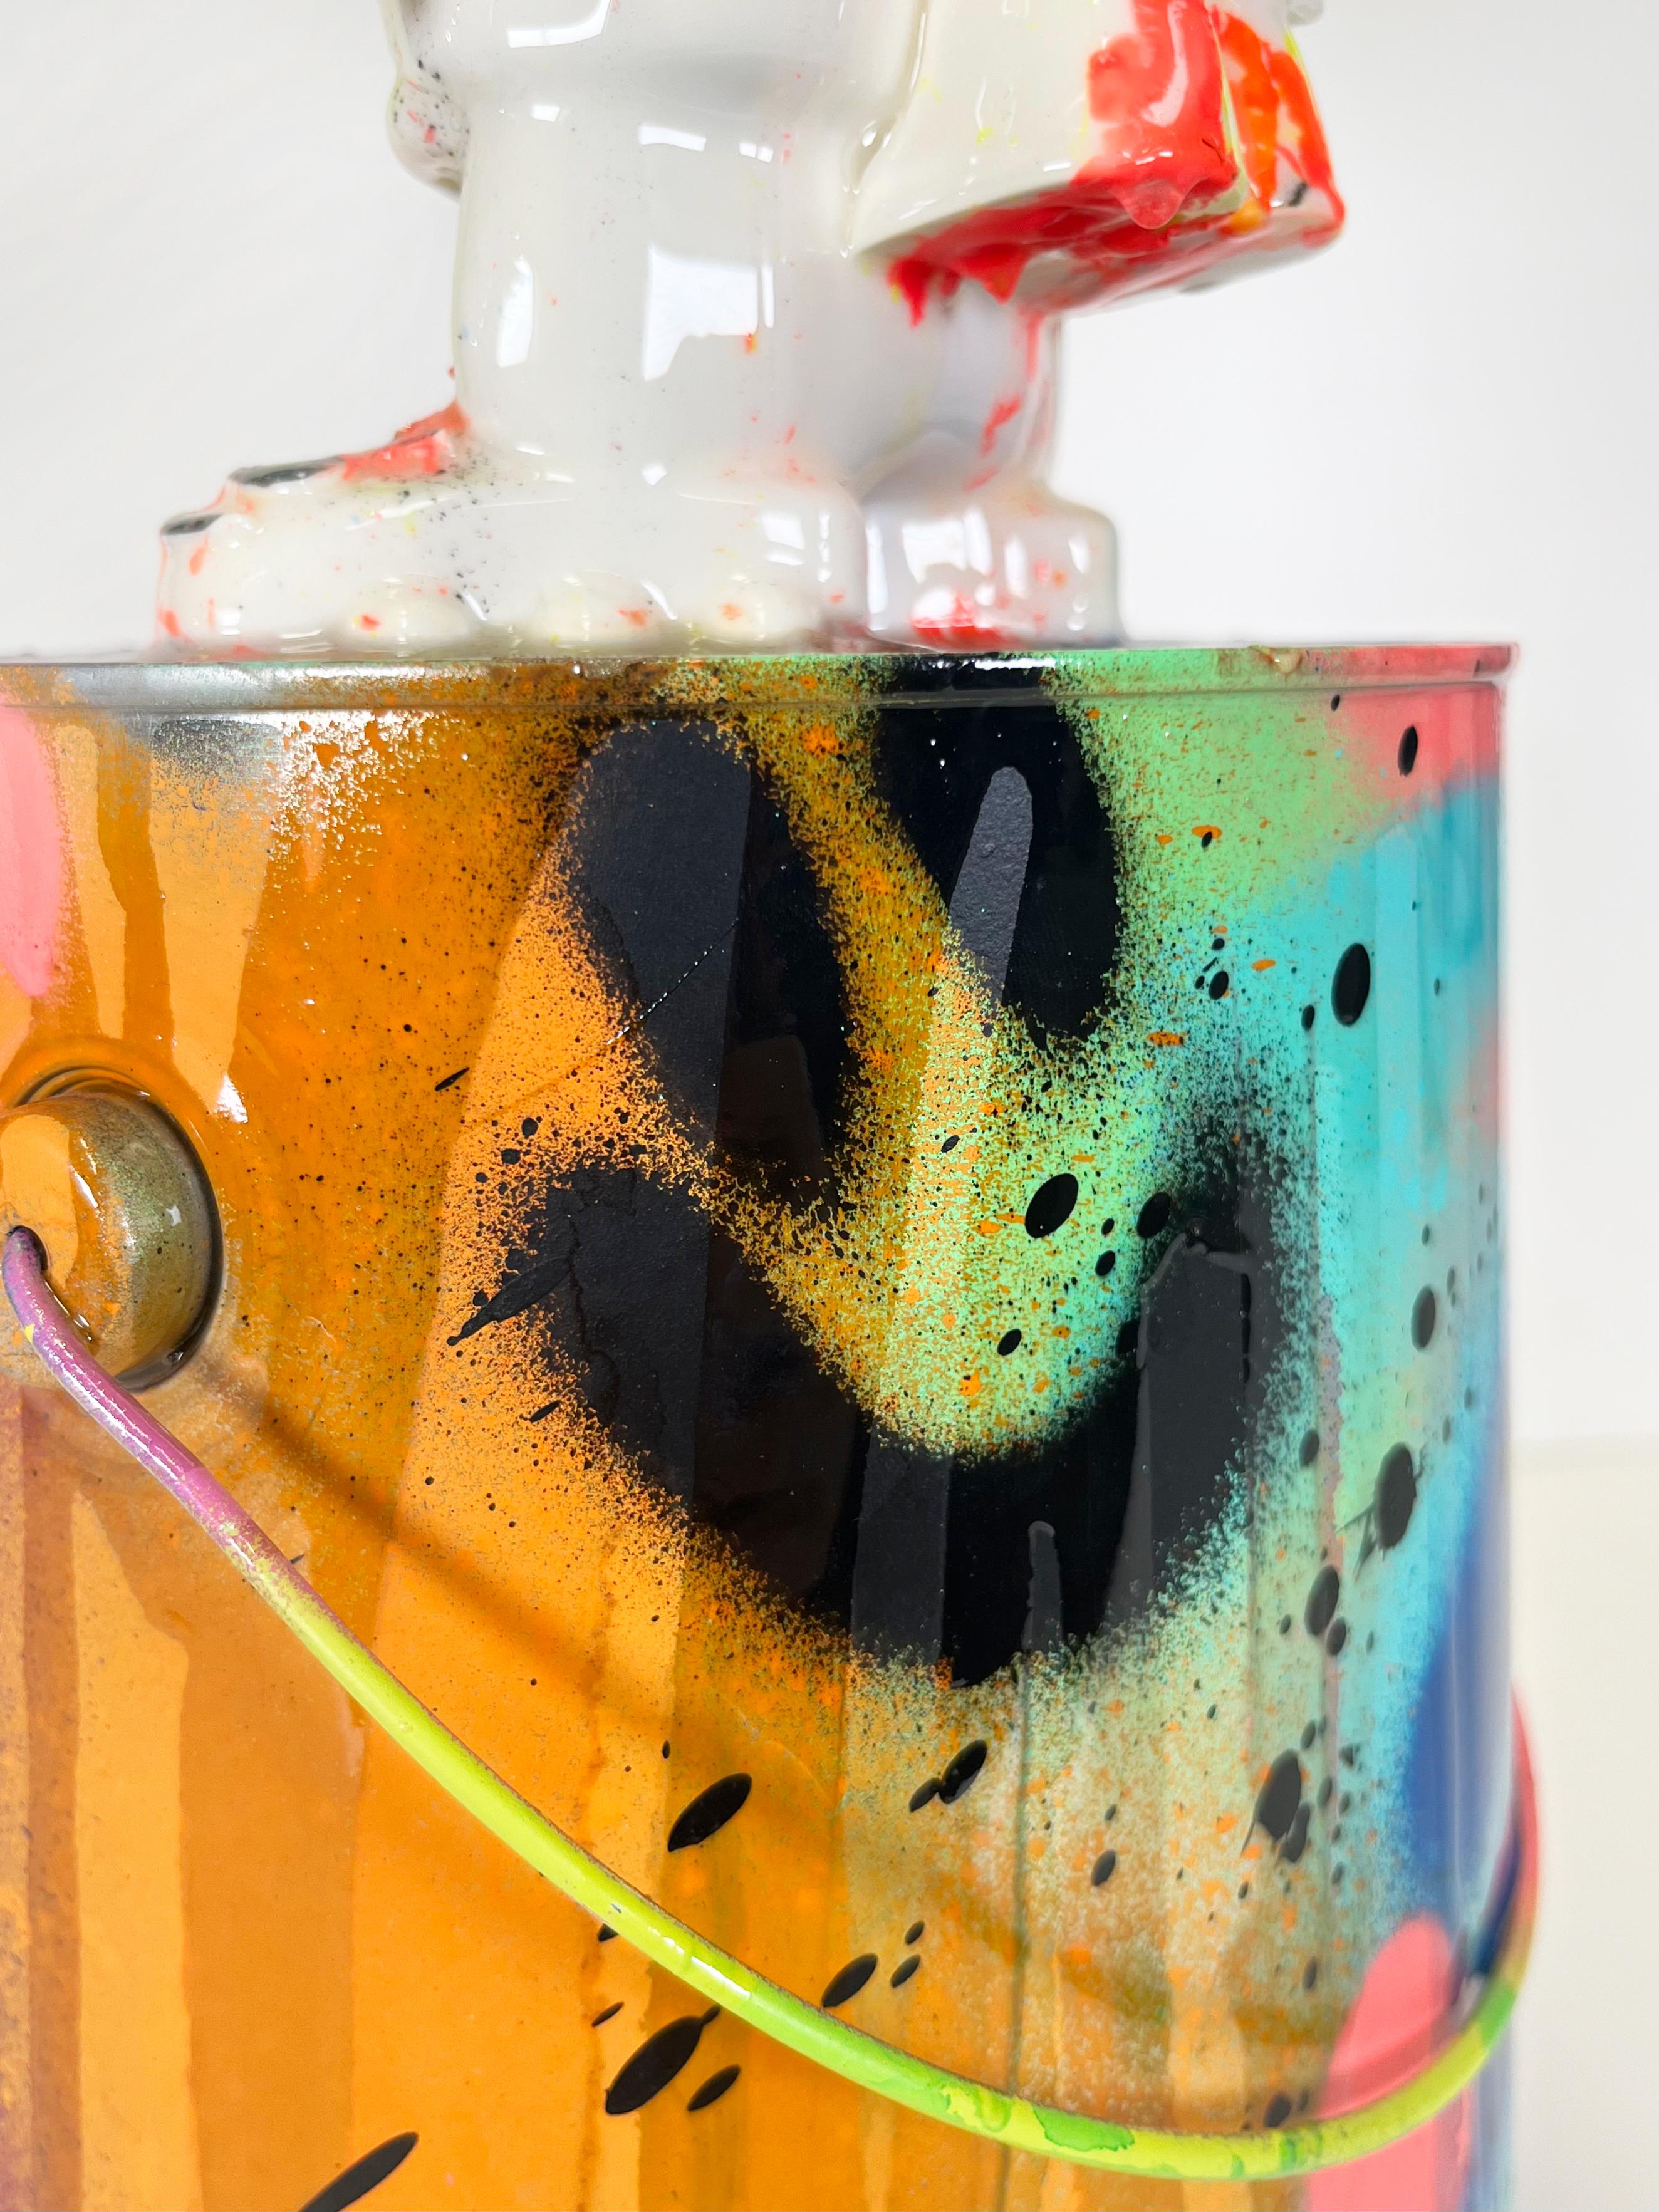 Technicolour Xeno Paint Can v2, colorful and cool resin cast figure sculpture - Abstract Sculpture by Chris Solcz